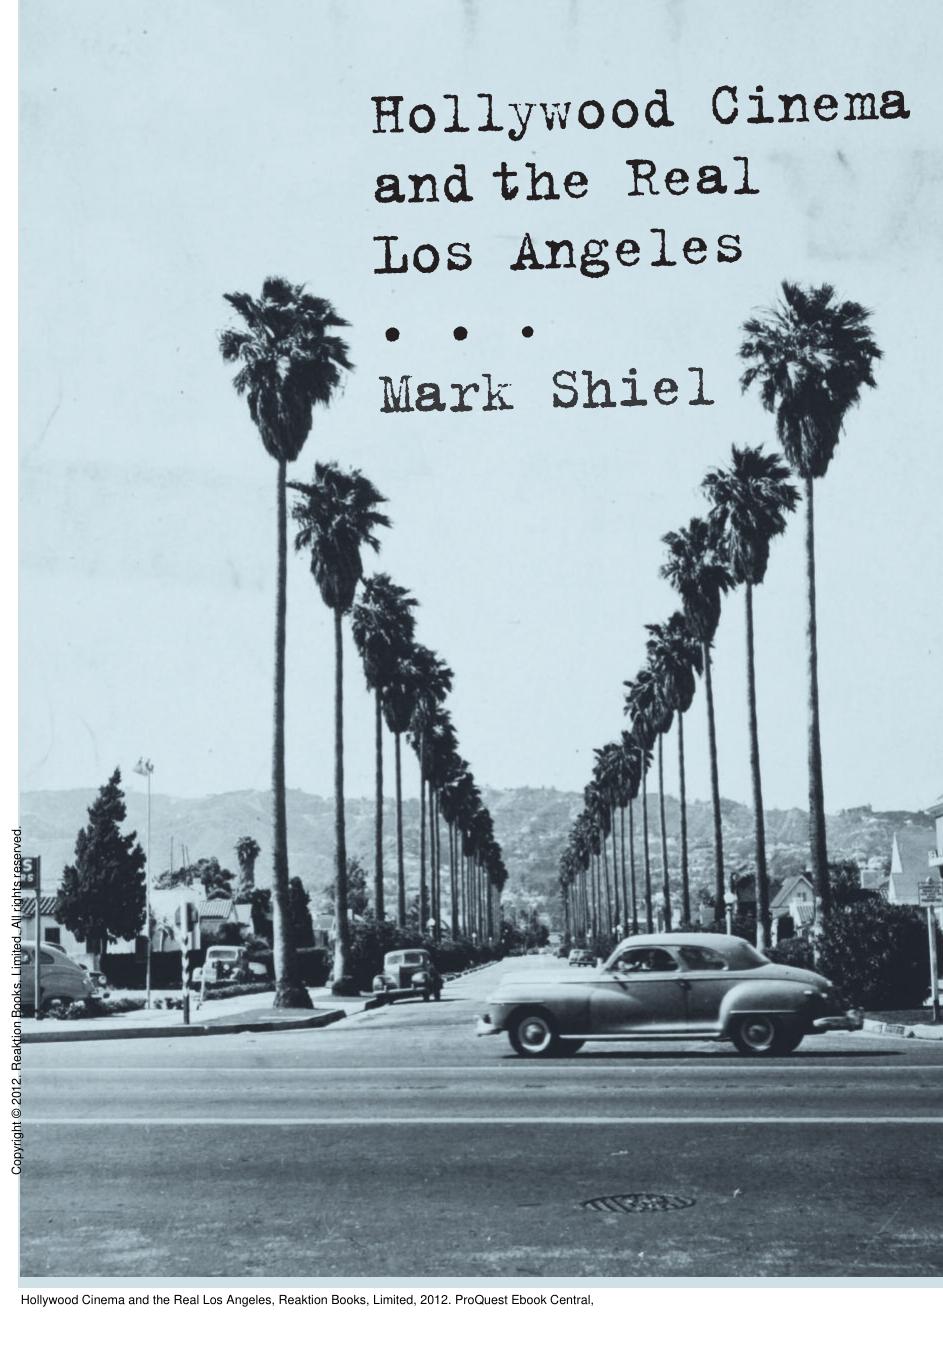 Hollywood Cinema and the Real Los Angeles by Mark Shiel